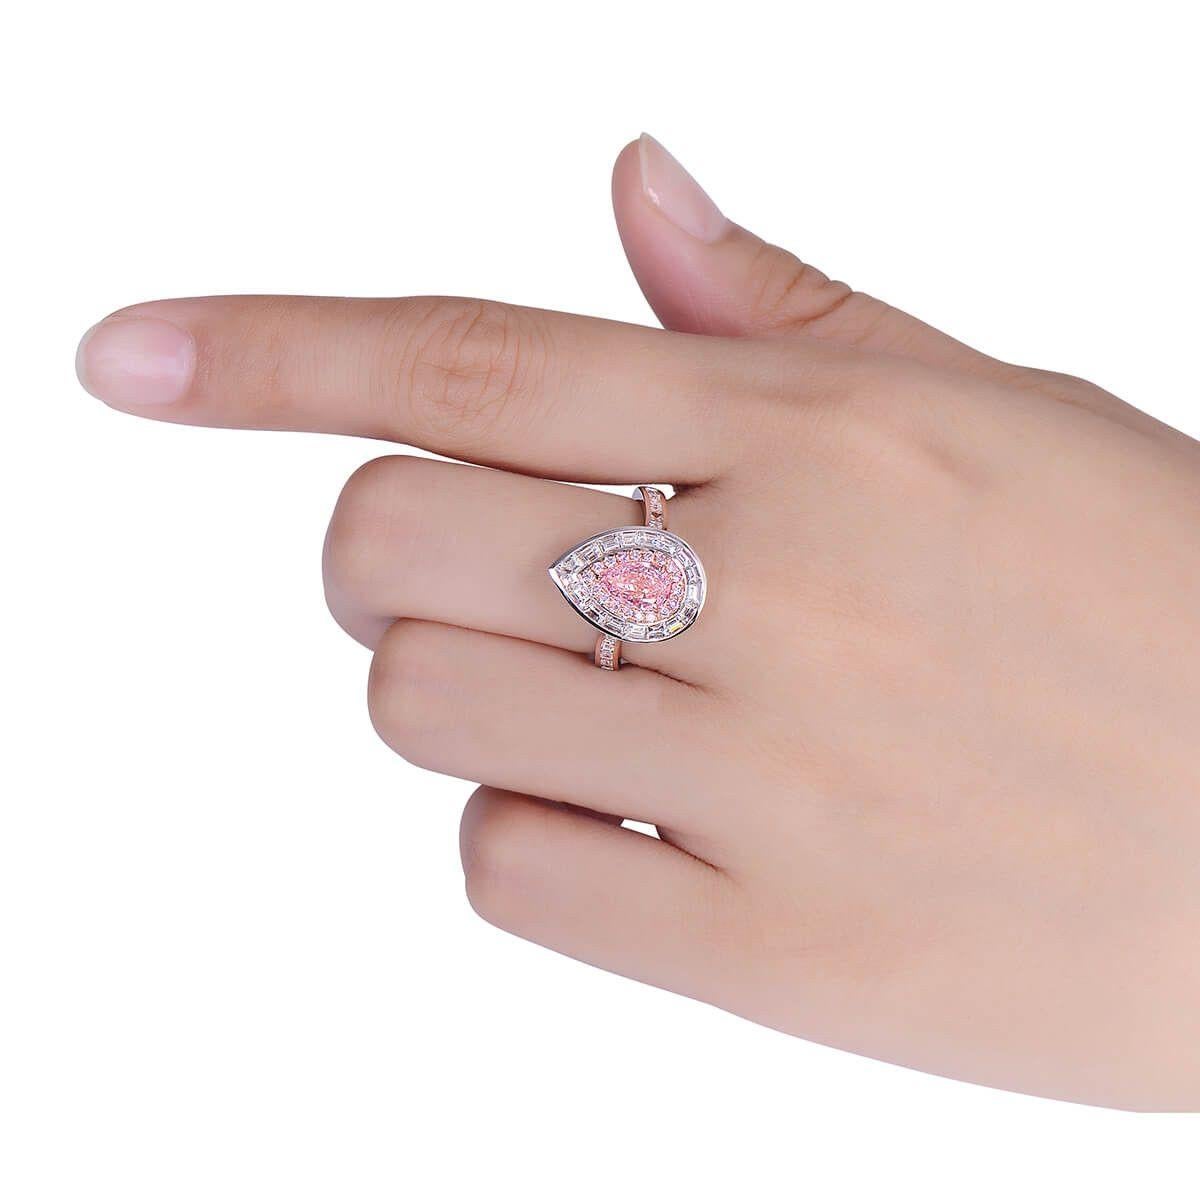 2.31 Carat Fancy Pink Diamond Ring 18 Karat White Gold GIA Certified In New Condition For Sale In Barnsley, GB